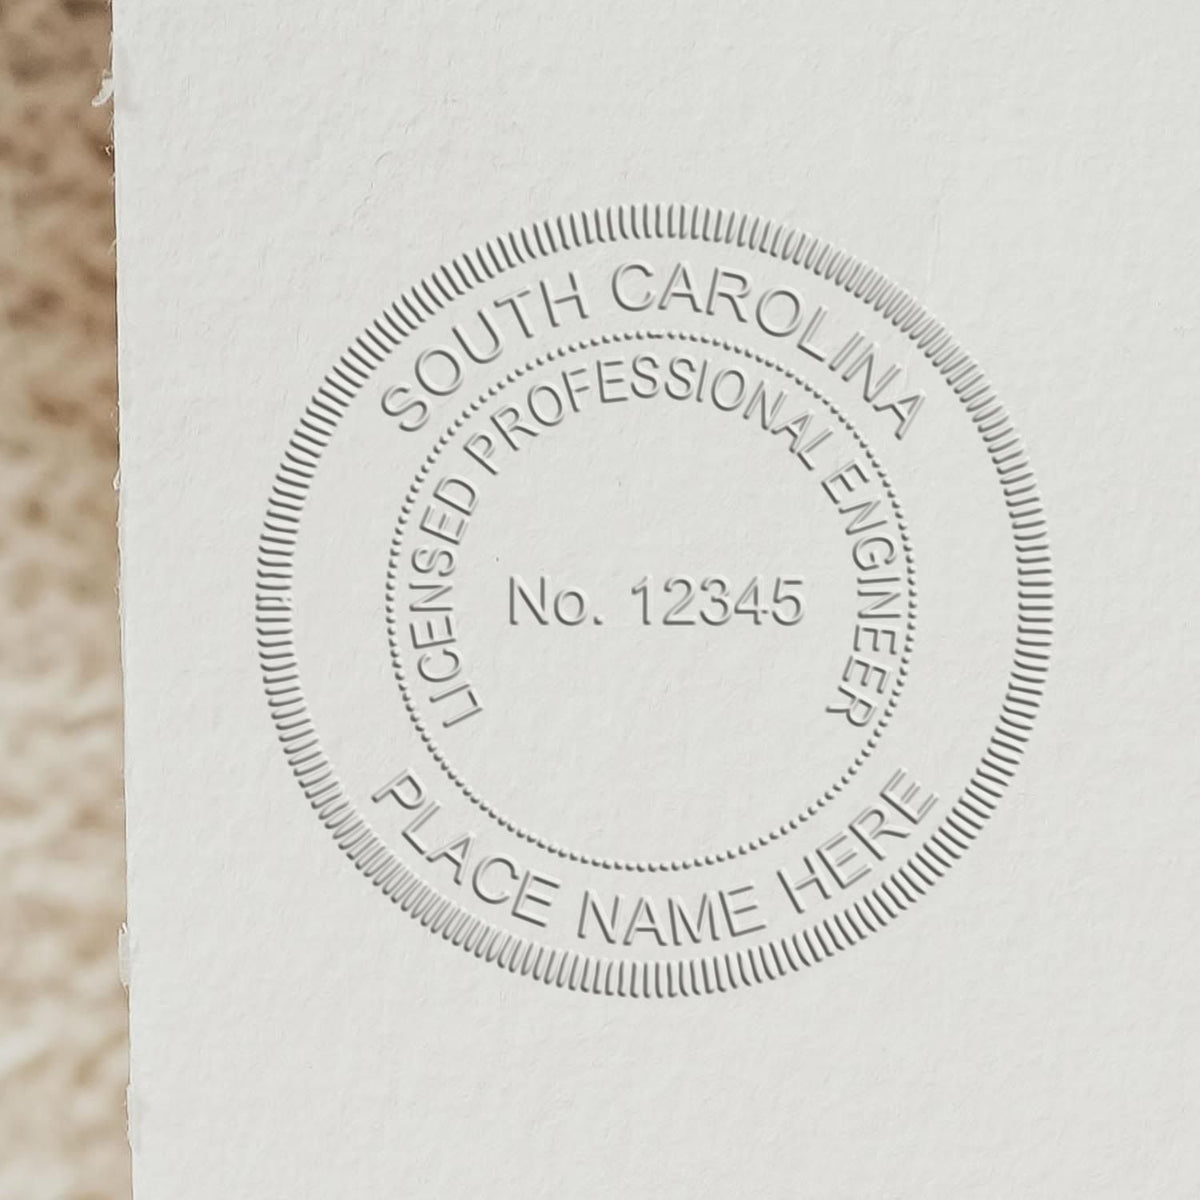 An alternative view of the Heavy Duty Cast Iron South Carolina Engineer Seal Embosser stamped on a sheet of paper showing the image in use